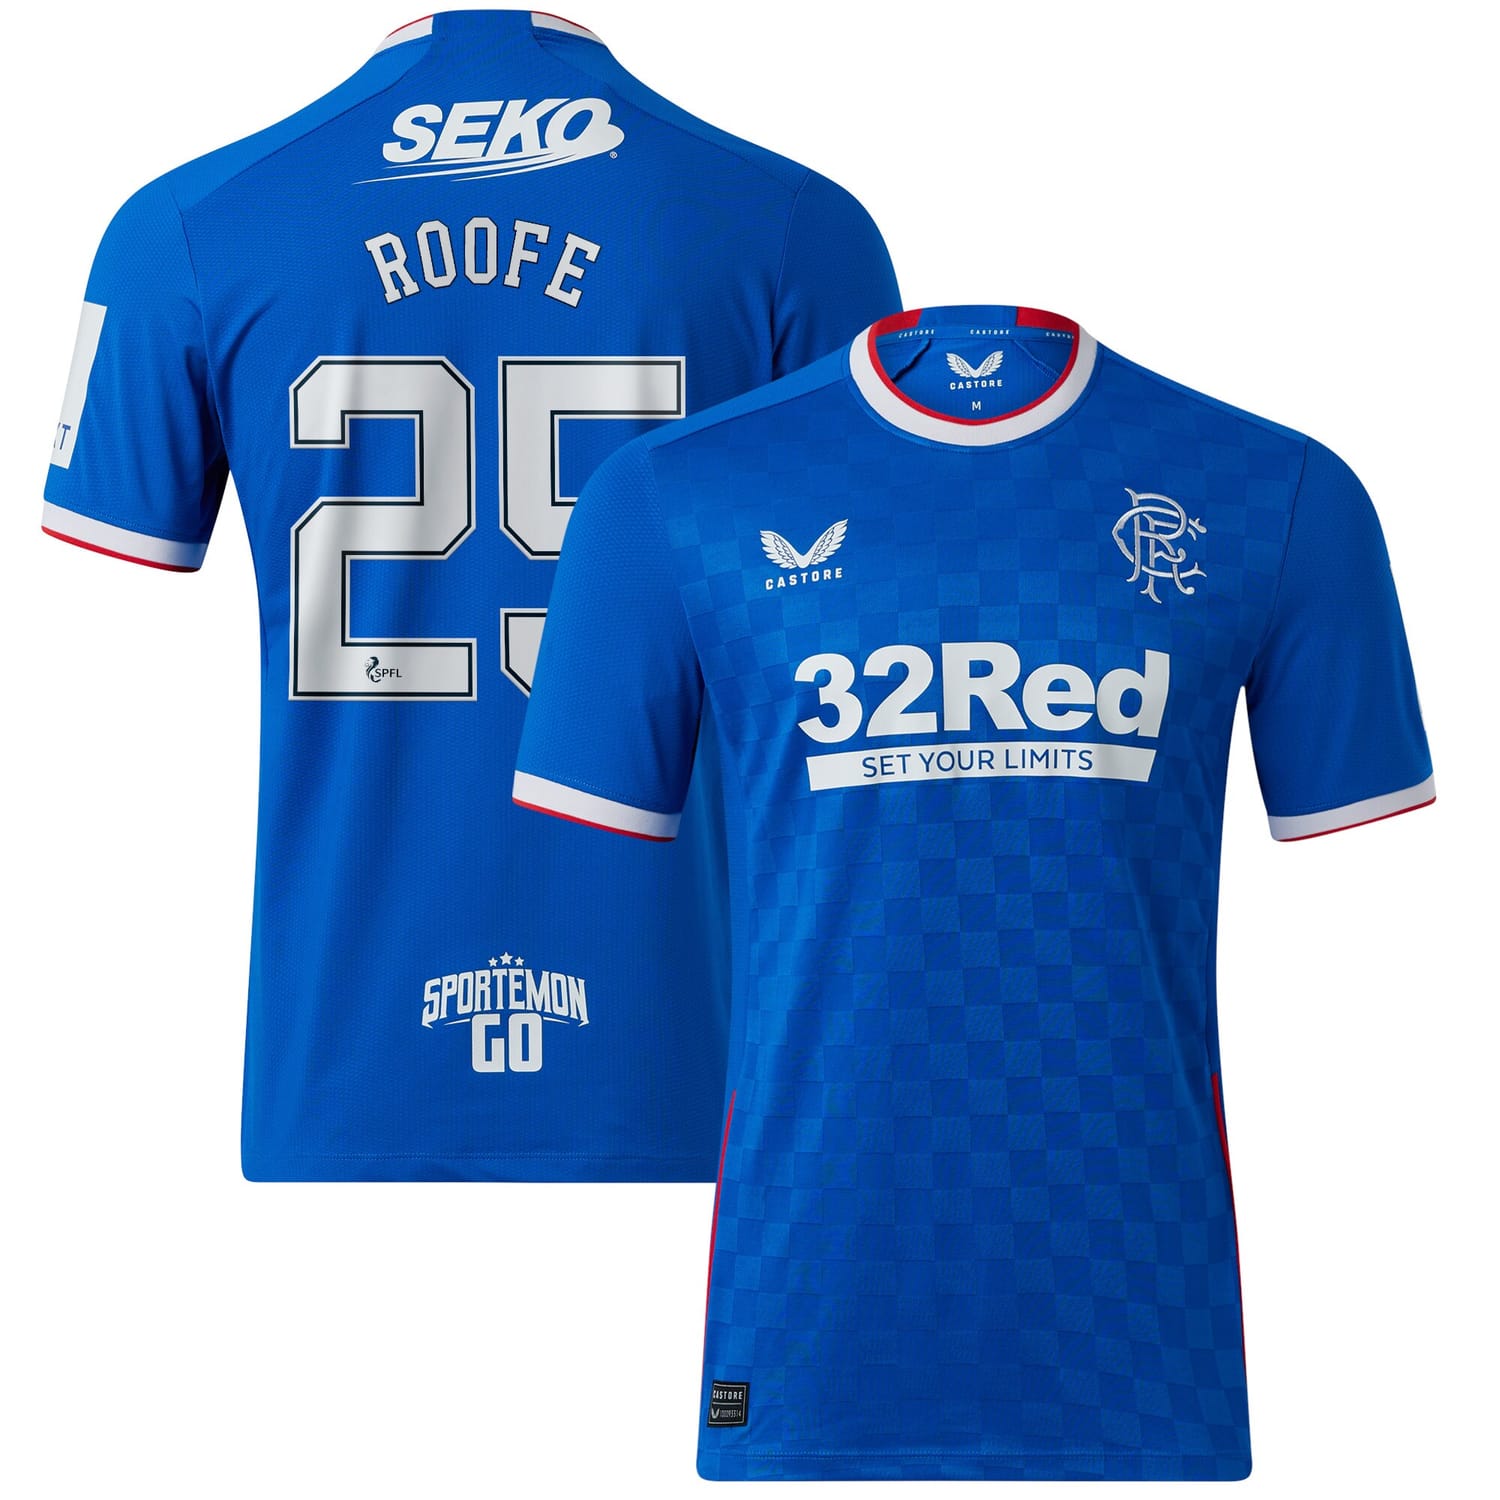 Scottish Premiership Rangers FC Home Pro Jersey Shirt 2022-23 player Roofe 25 printing for Men